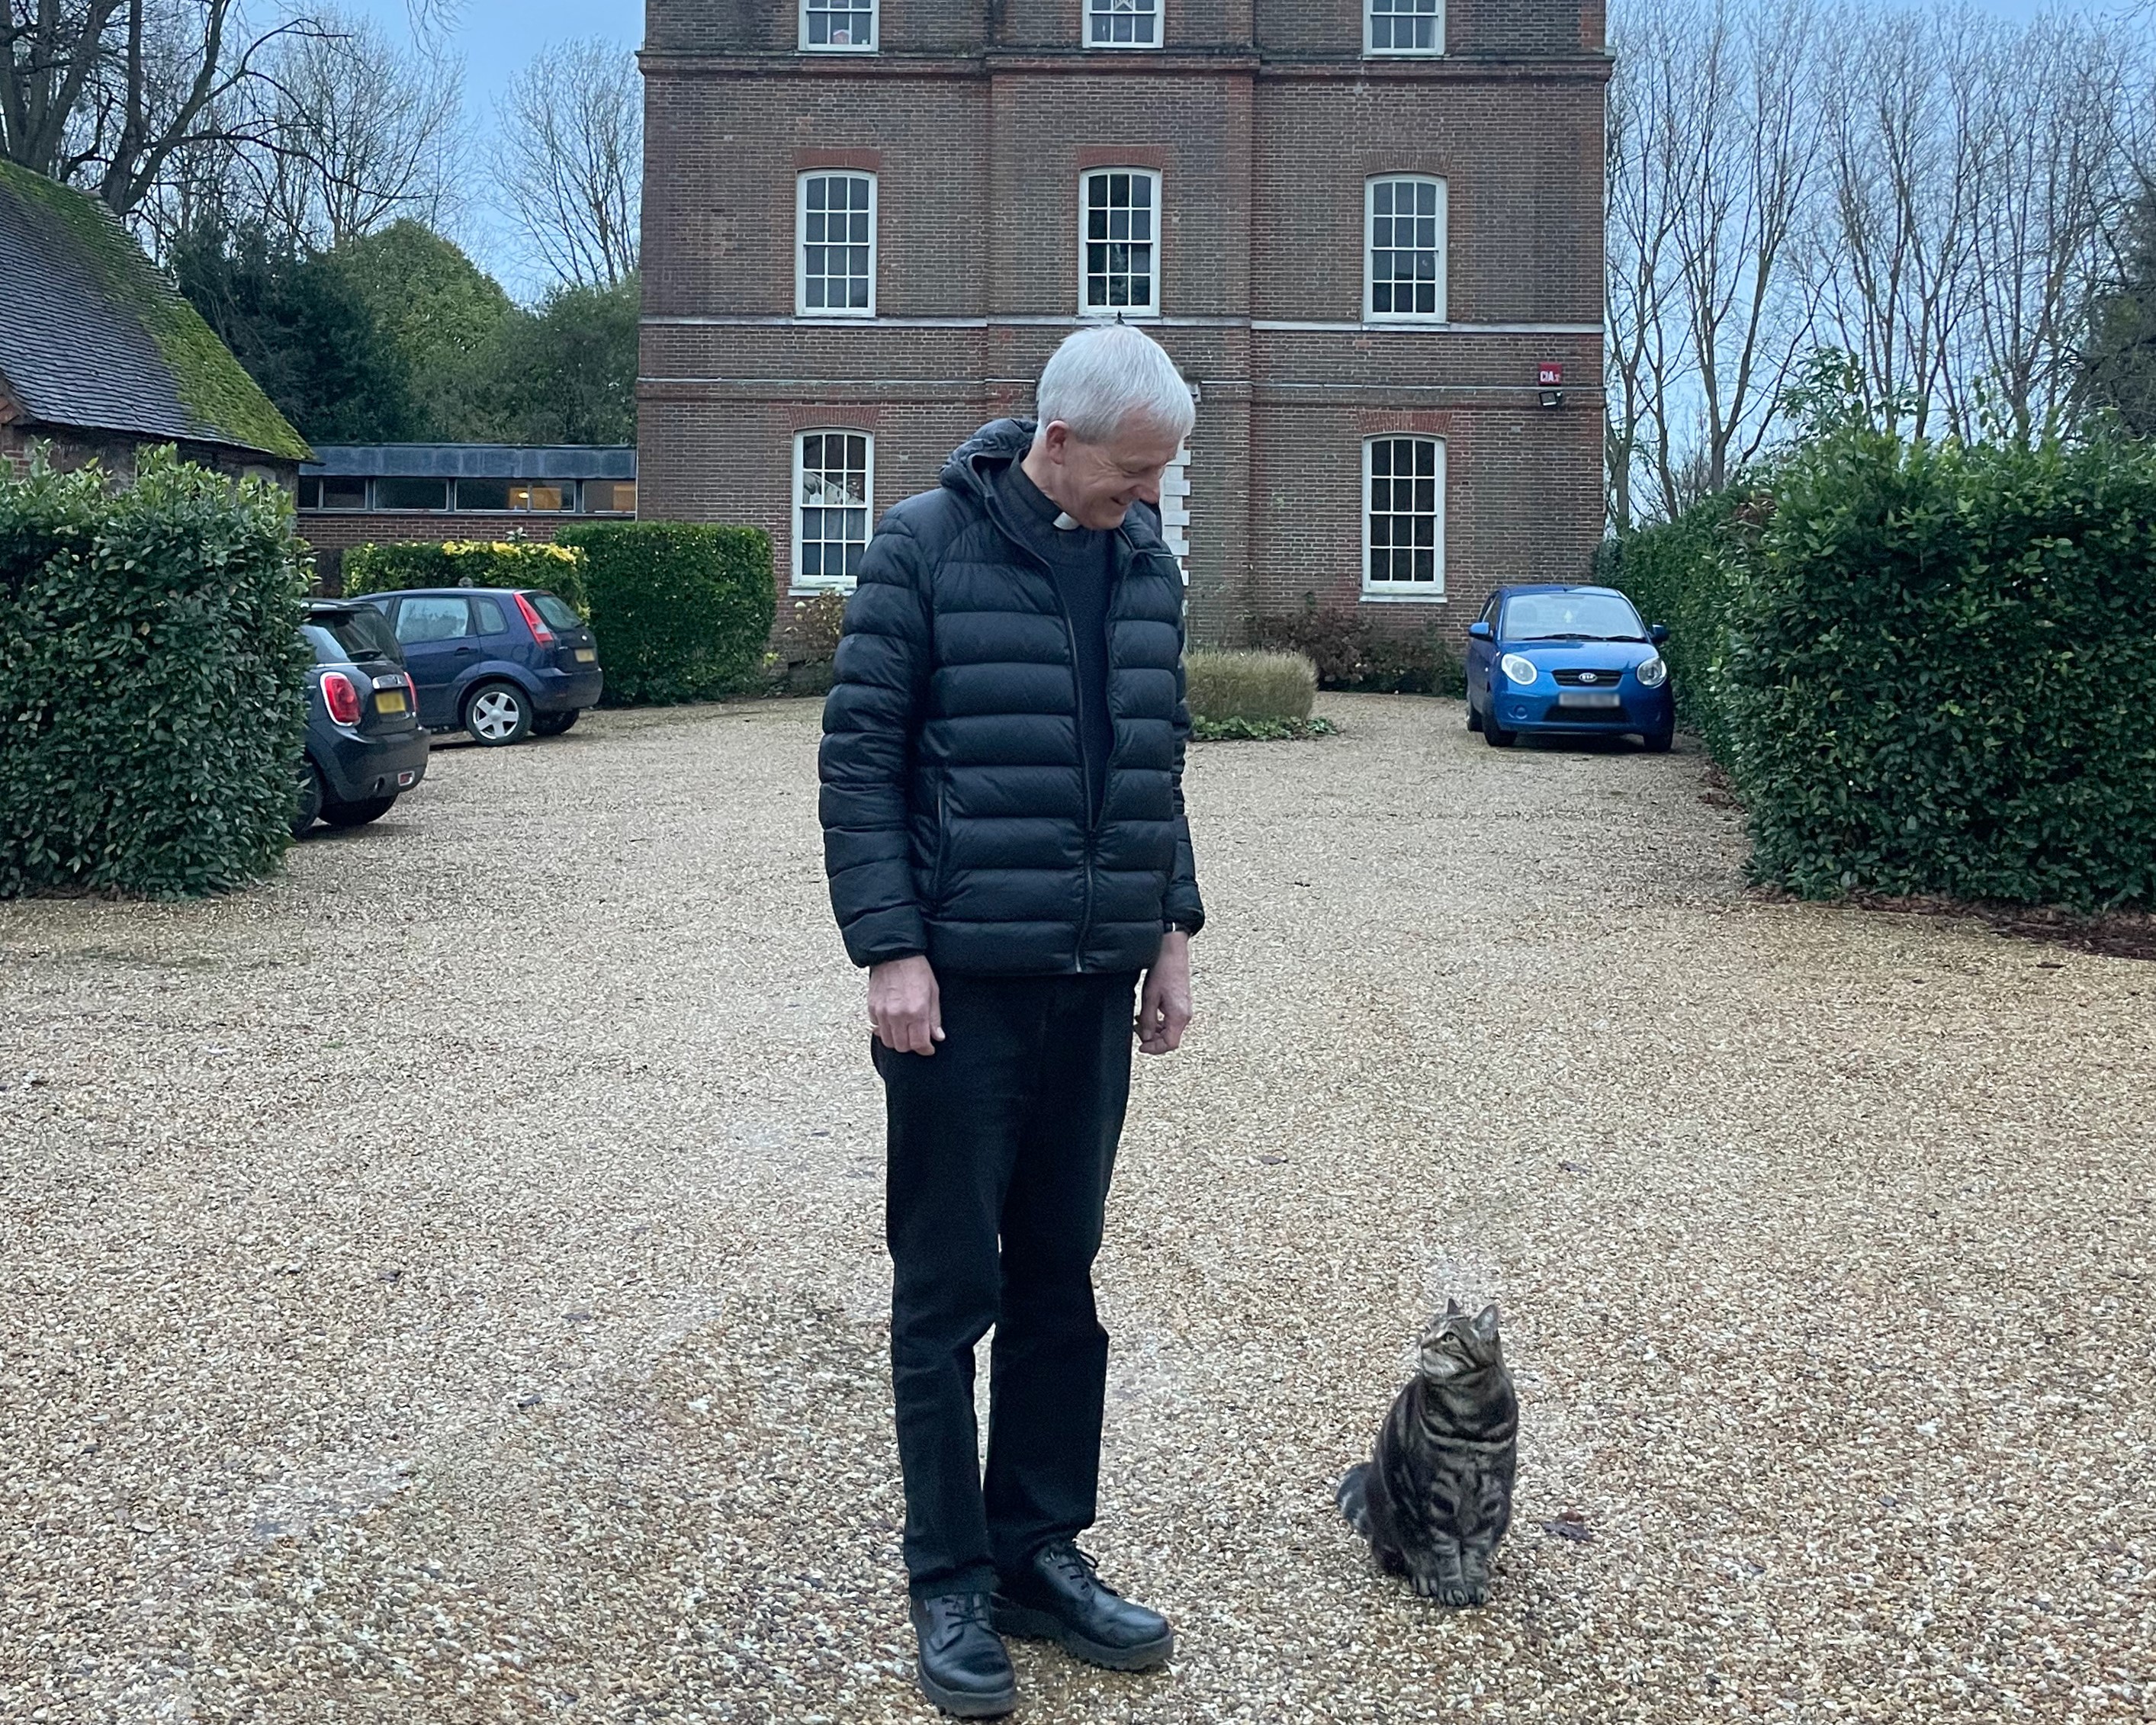 Interim Dean of Chichester, The Reverend Canon Simon Holland stands in front of the Deanery with Bertie, a tabby brown cat